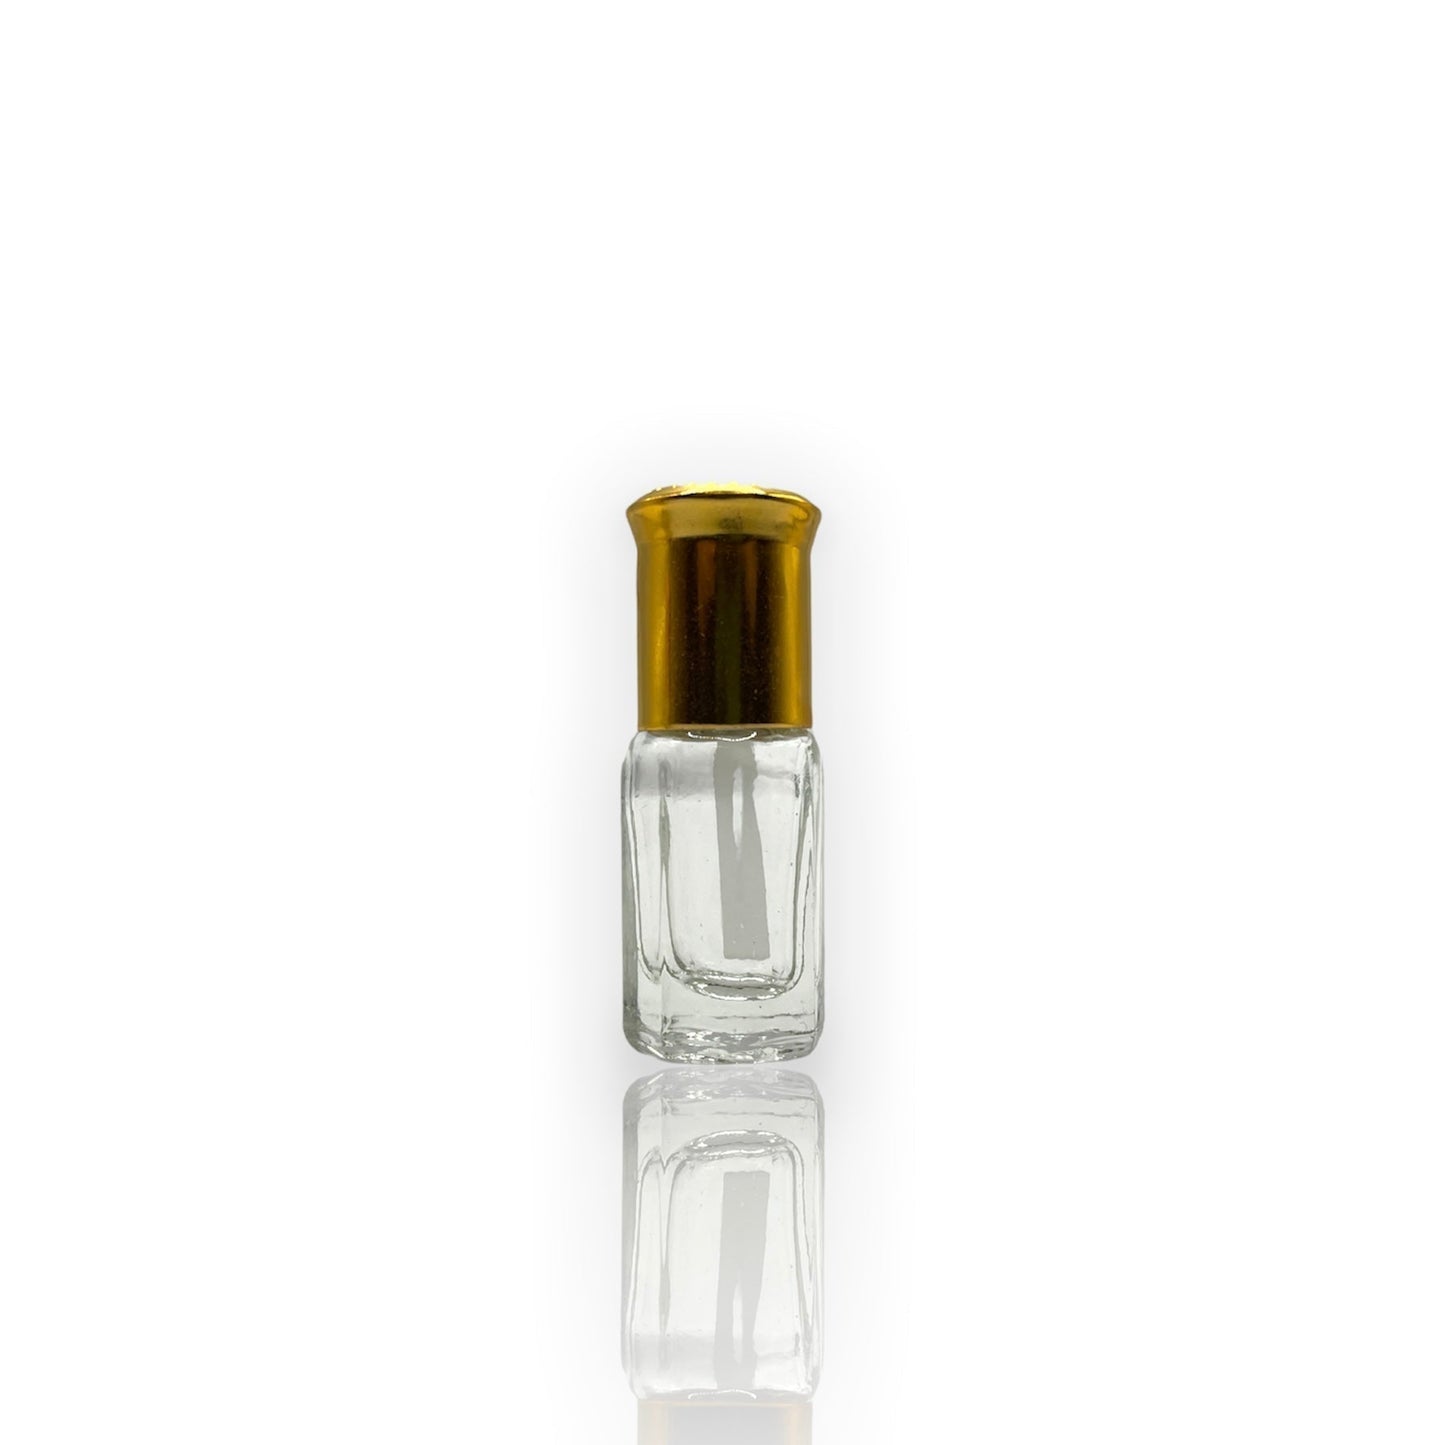 F-16 Oil Perfume *Inspired Chanel Coco